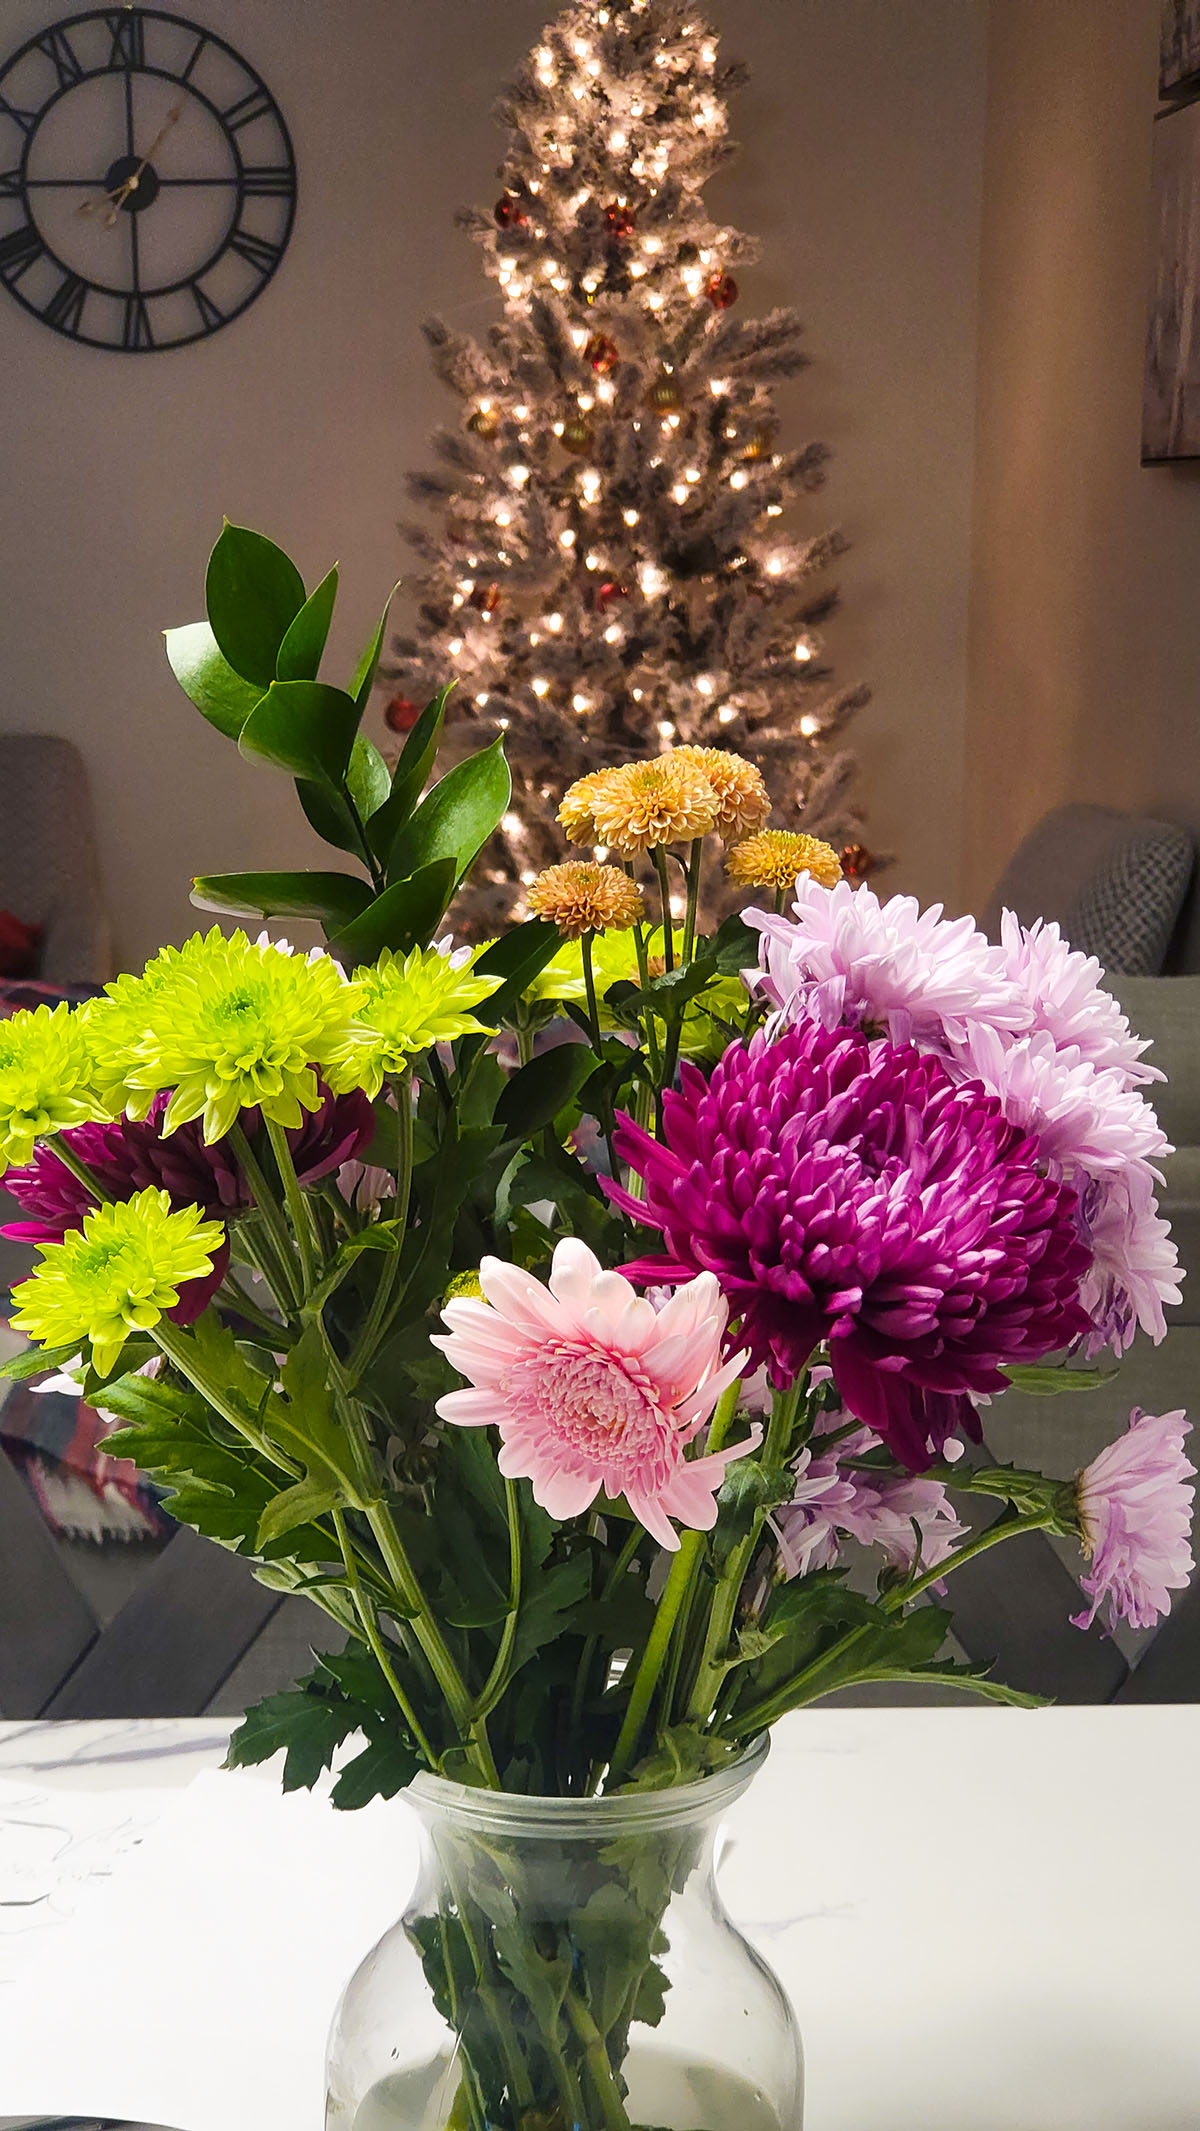 Flowers on a vase with a Christmas tree in the background. You are Love.